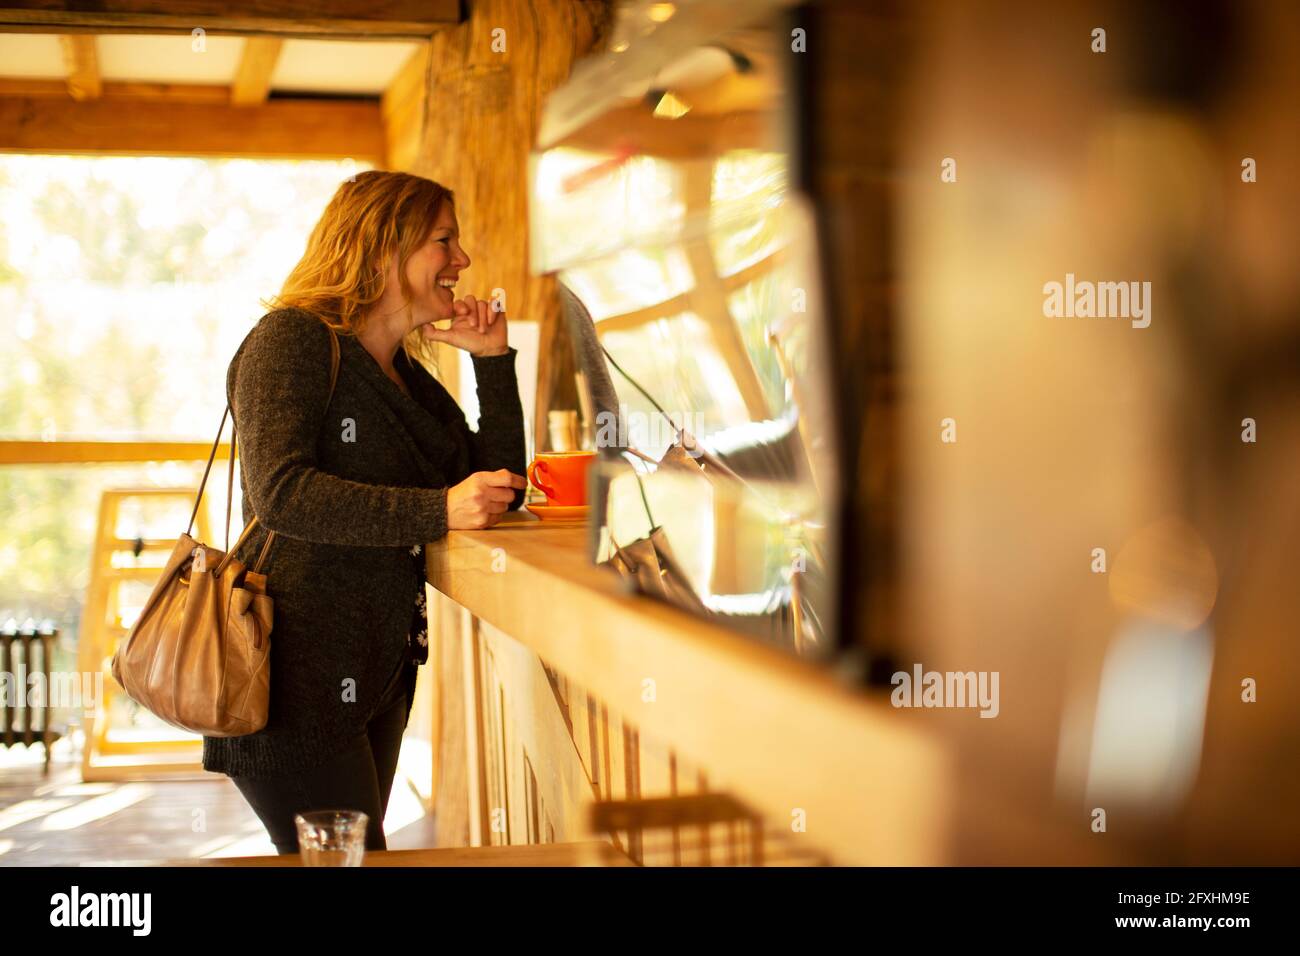 Happy female customer ordering coffee at cafe counter Stock Photo